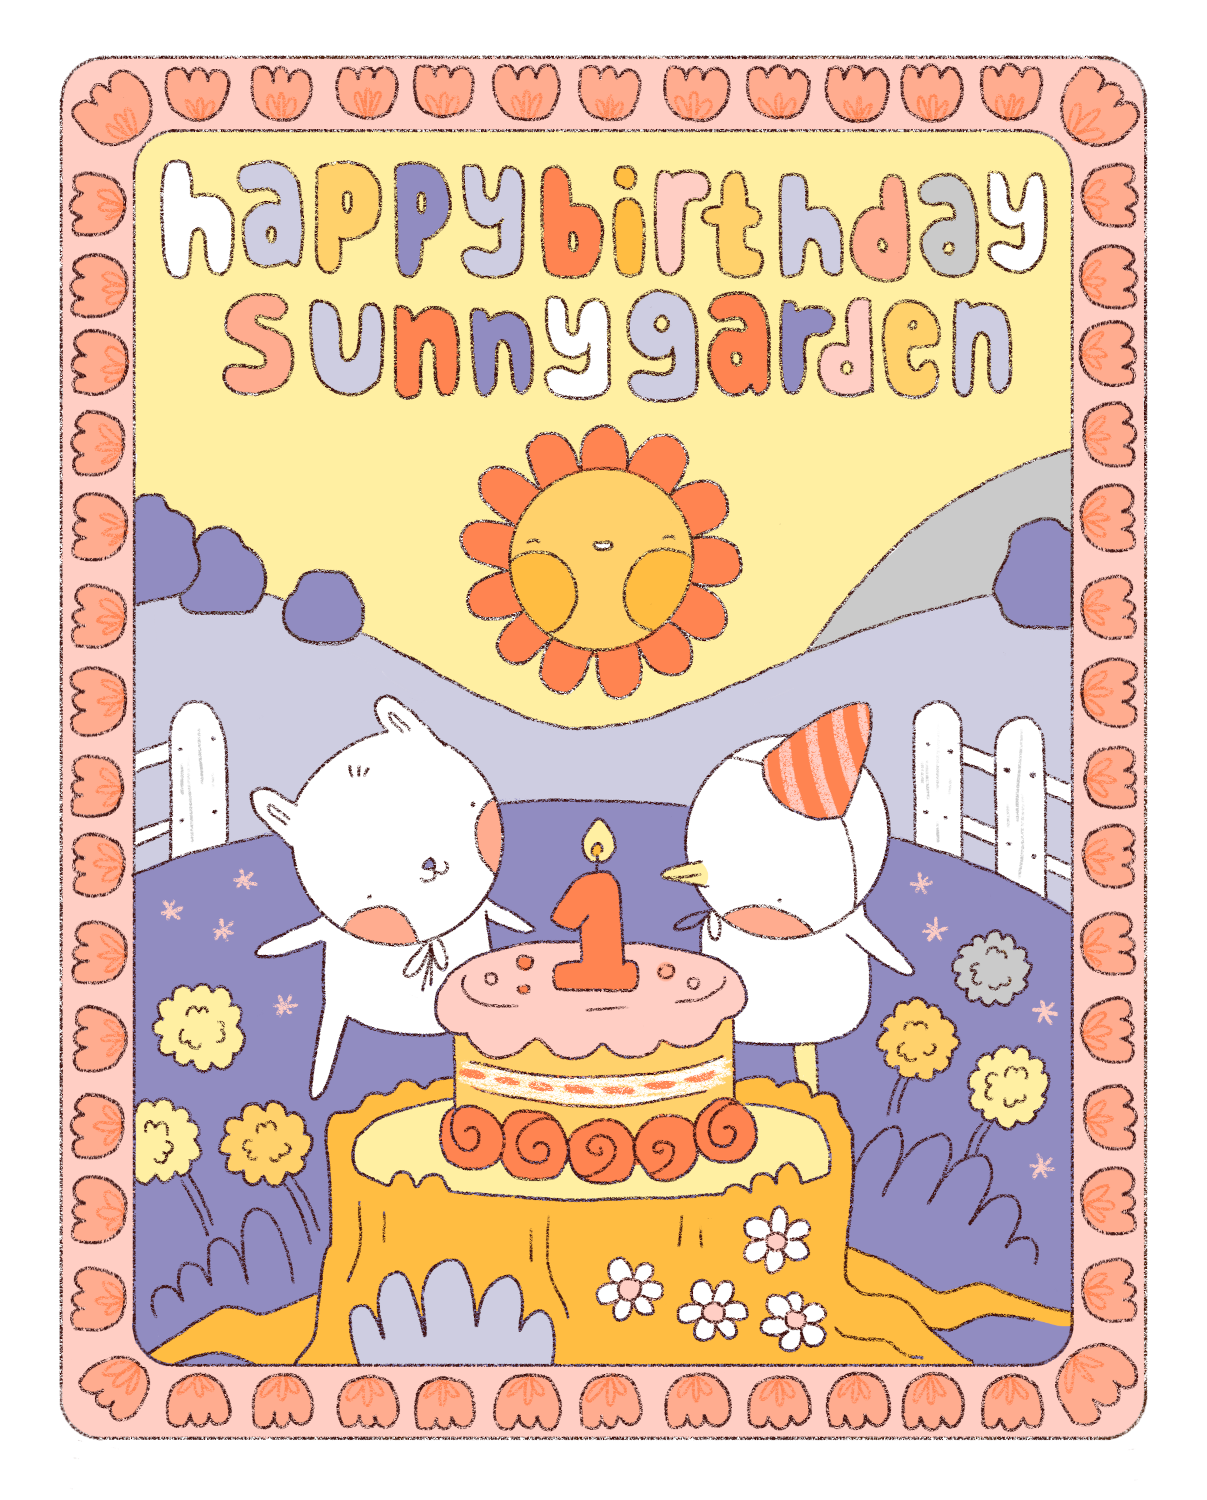 a cute illustration in pastel colors of animals gathered around a birthday cake. it's a white rabbit and duck, the cake is resting on a tree stump. they're standing in a rolling hills landscape, specked with dandelions, daisies and other little flowers. there's a smiling sun in the sky, and the words: happy birthday sunny garden. the image is contained in a rectangular frame filled with pink tulips